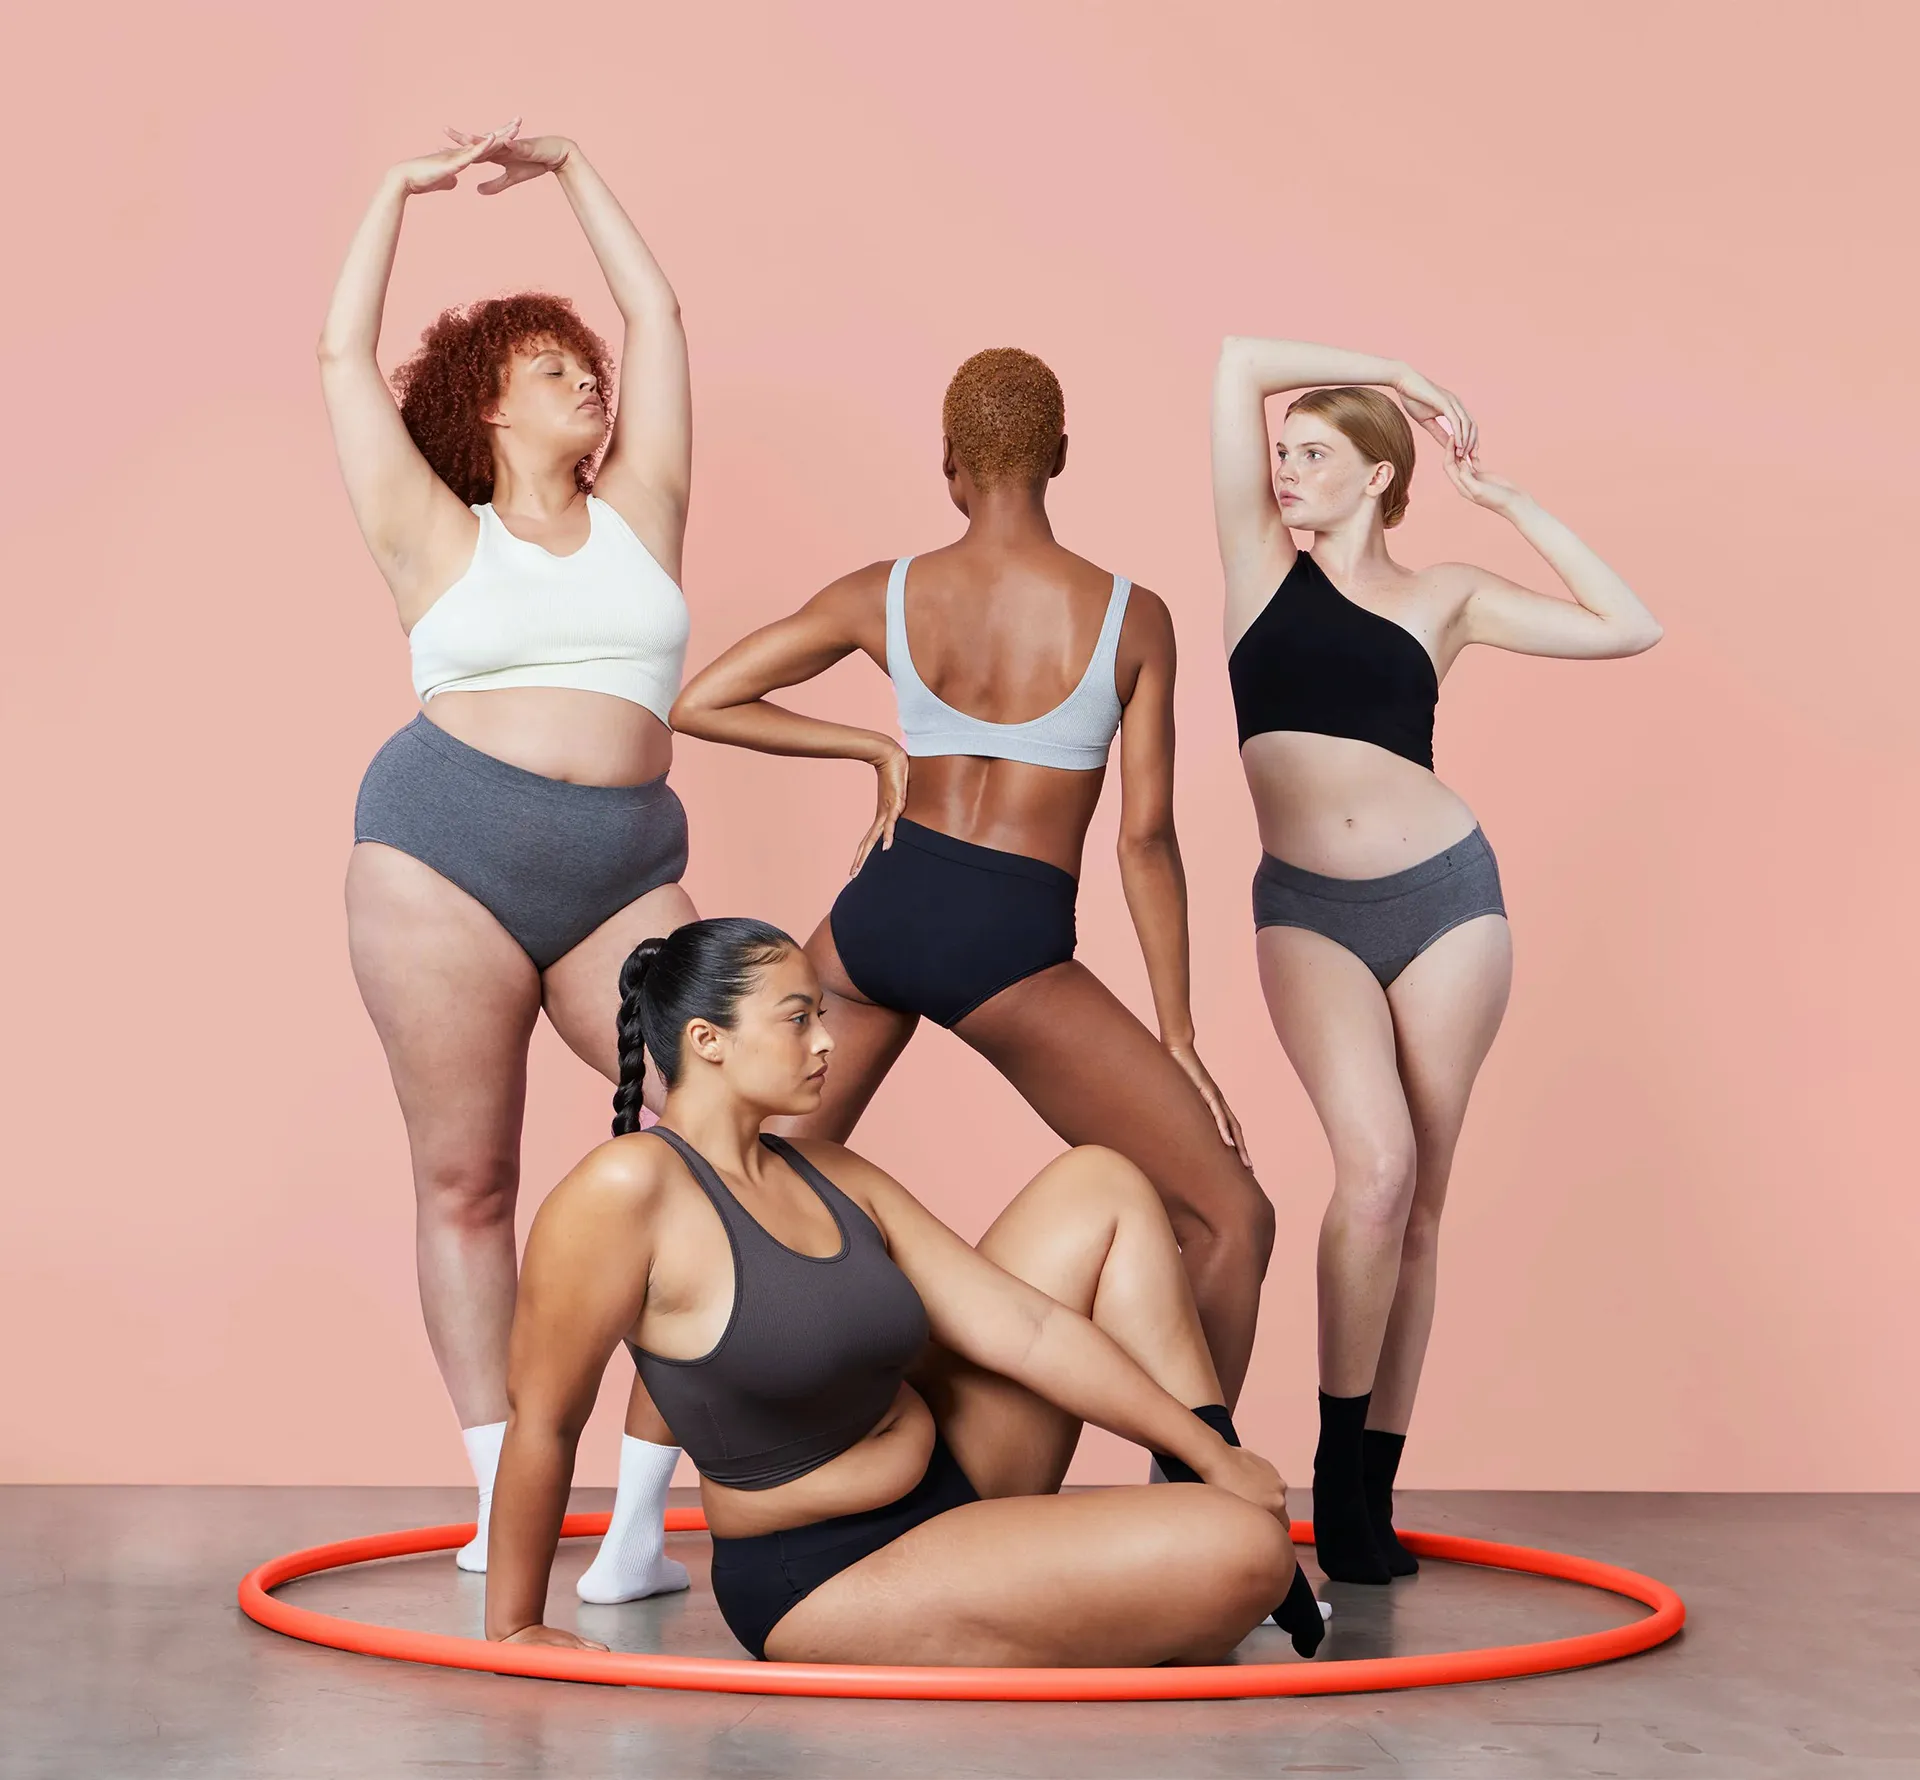 Four women wearing Thinx featured by Rodd